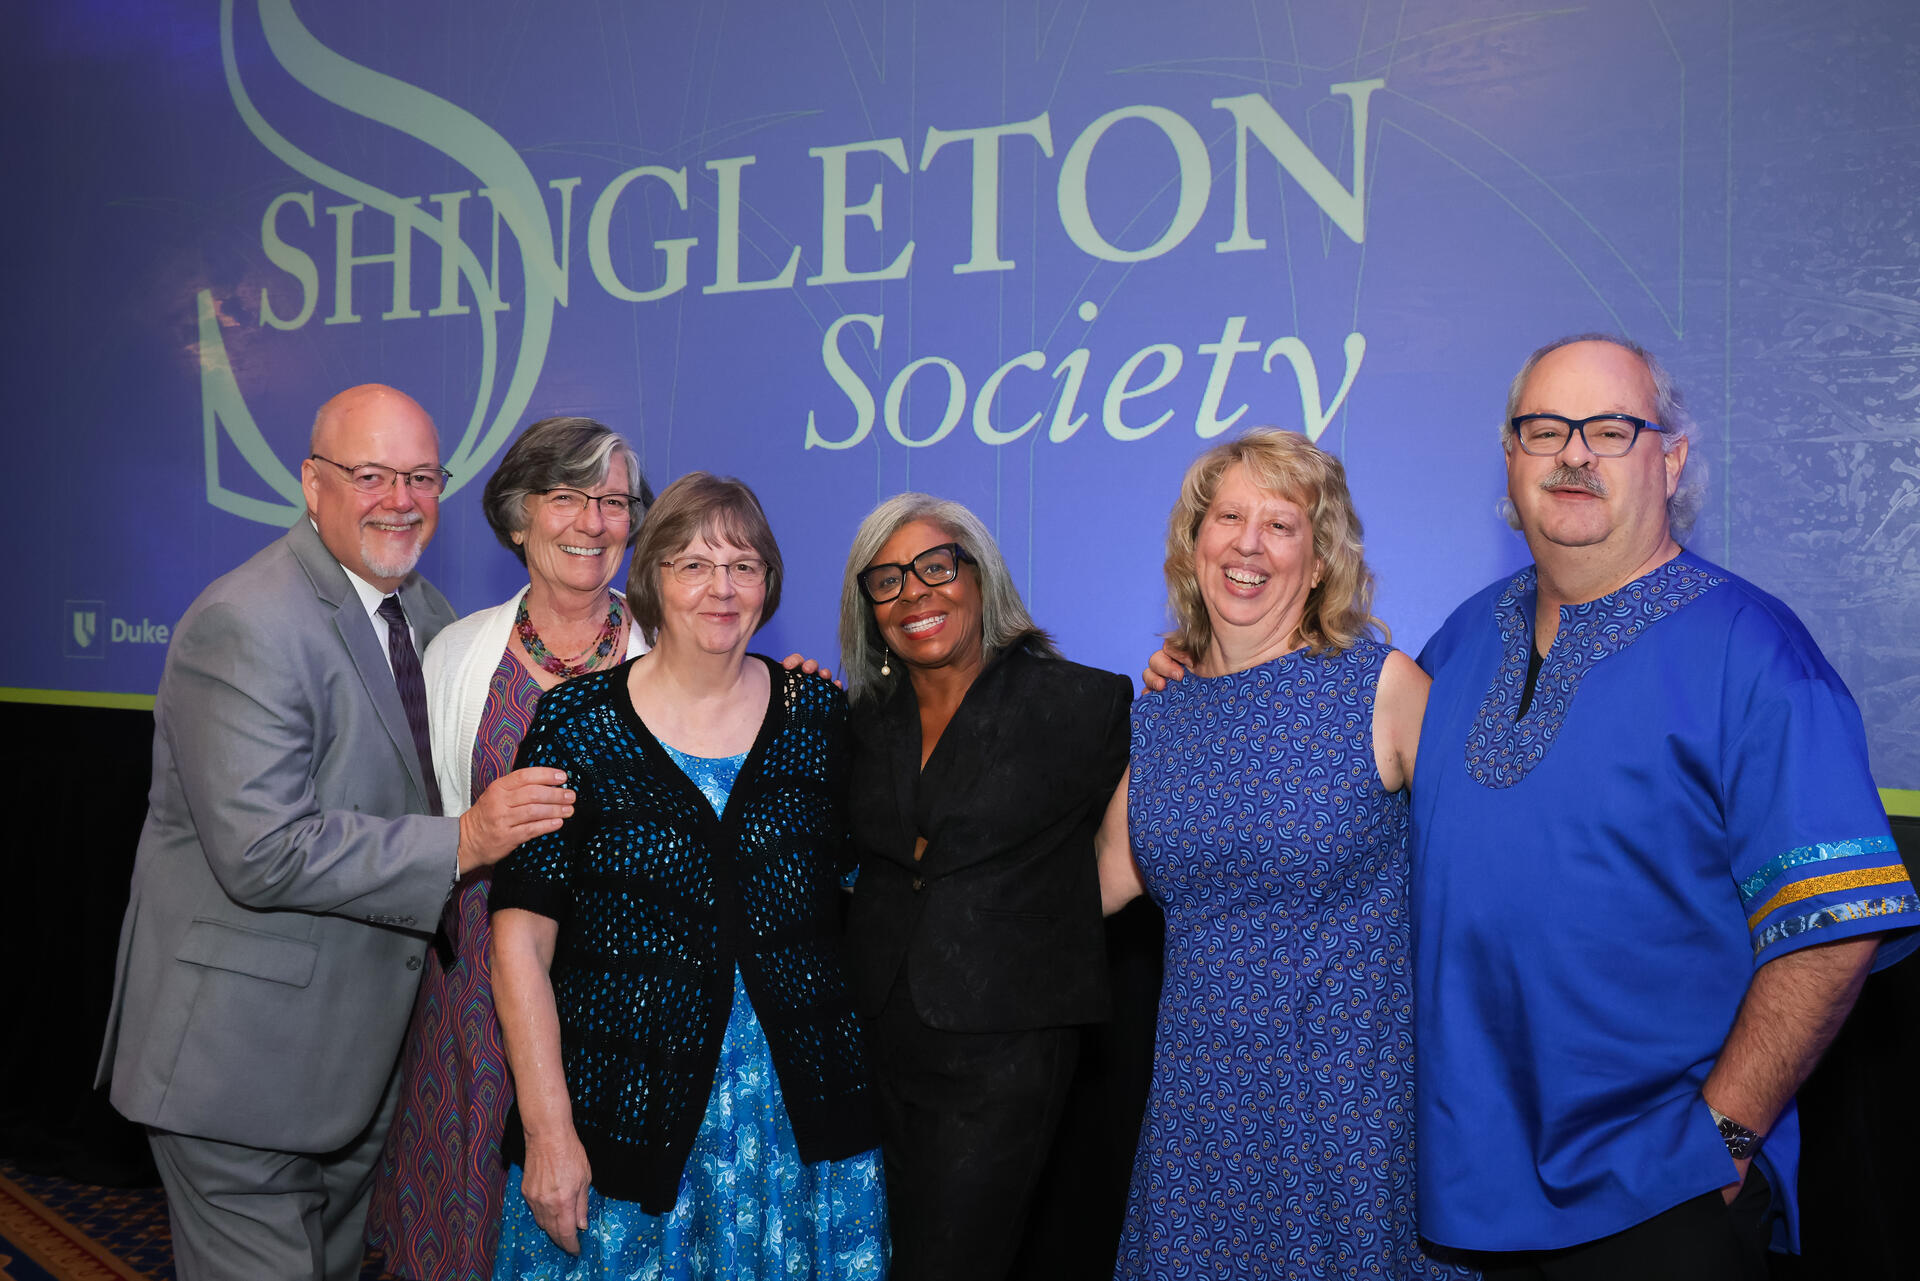 A group of people in front of a blue Shingleton Society backdrop